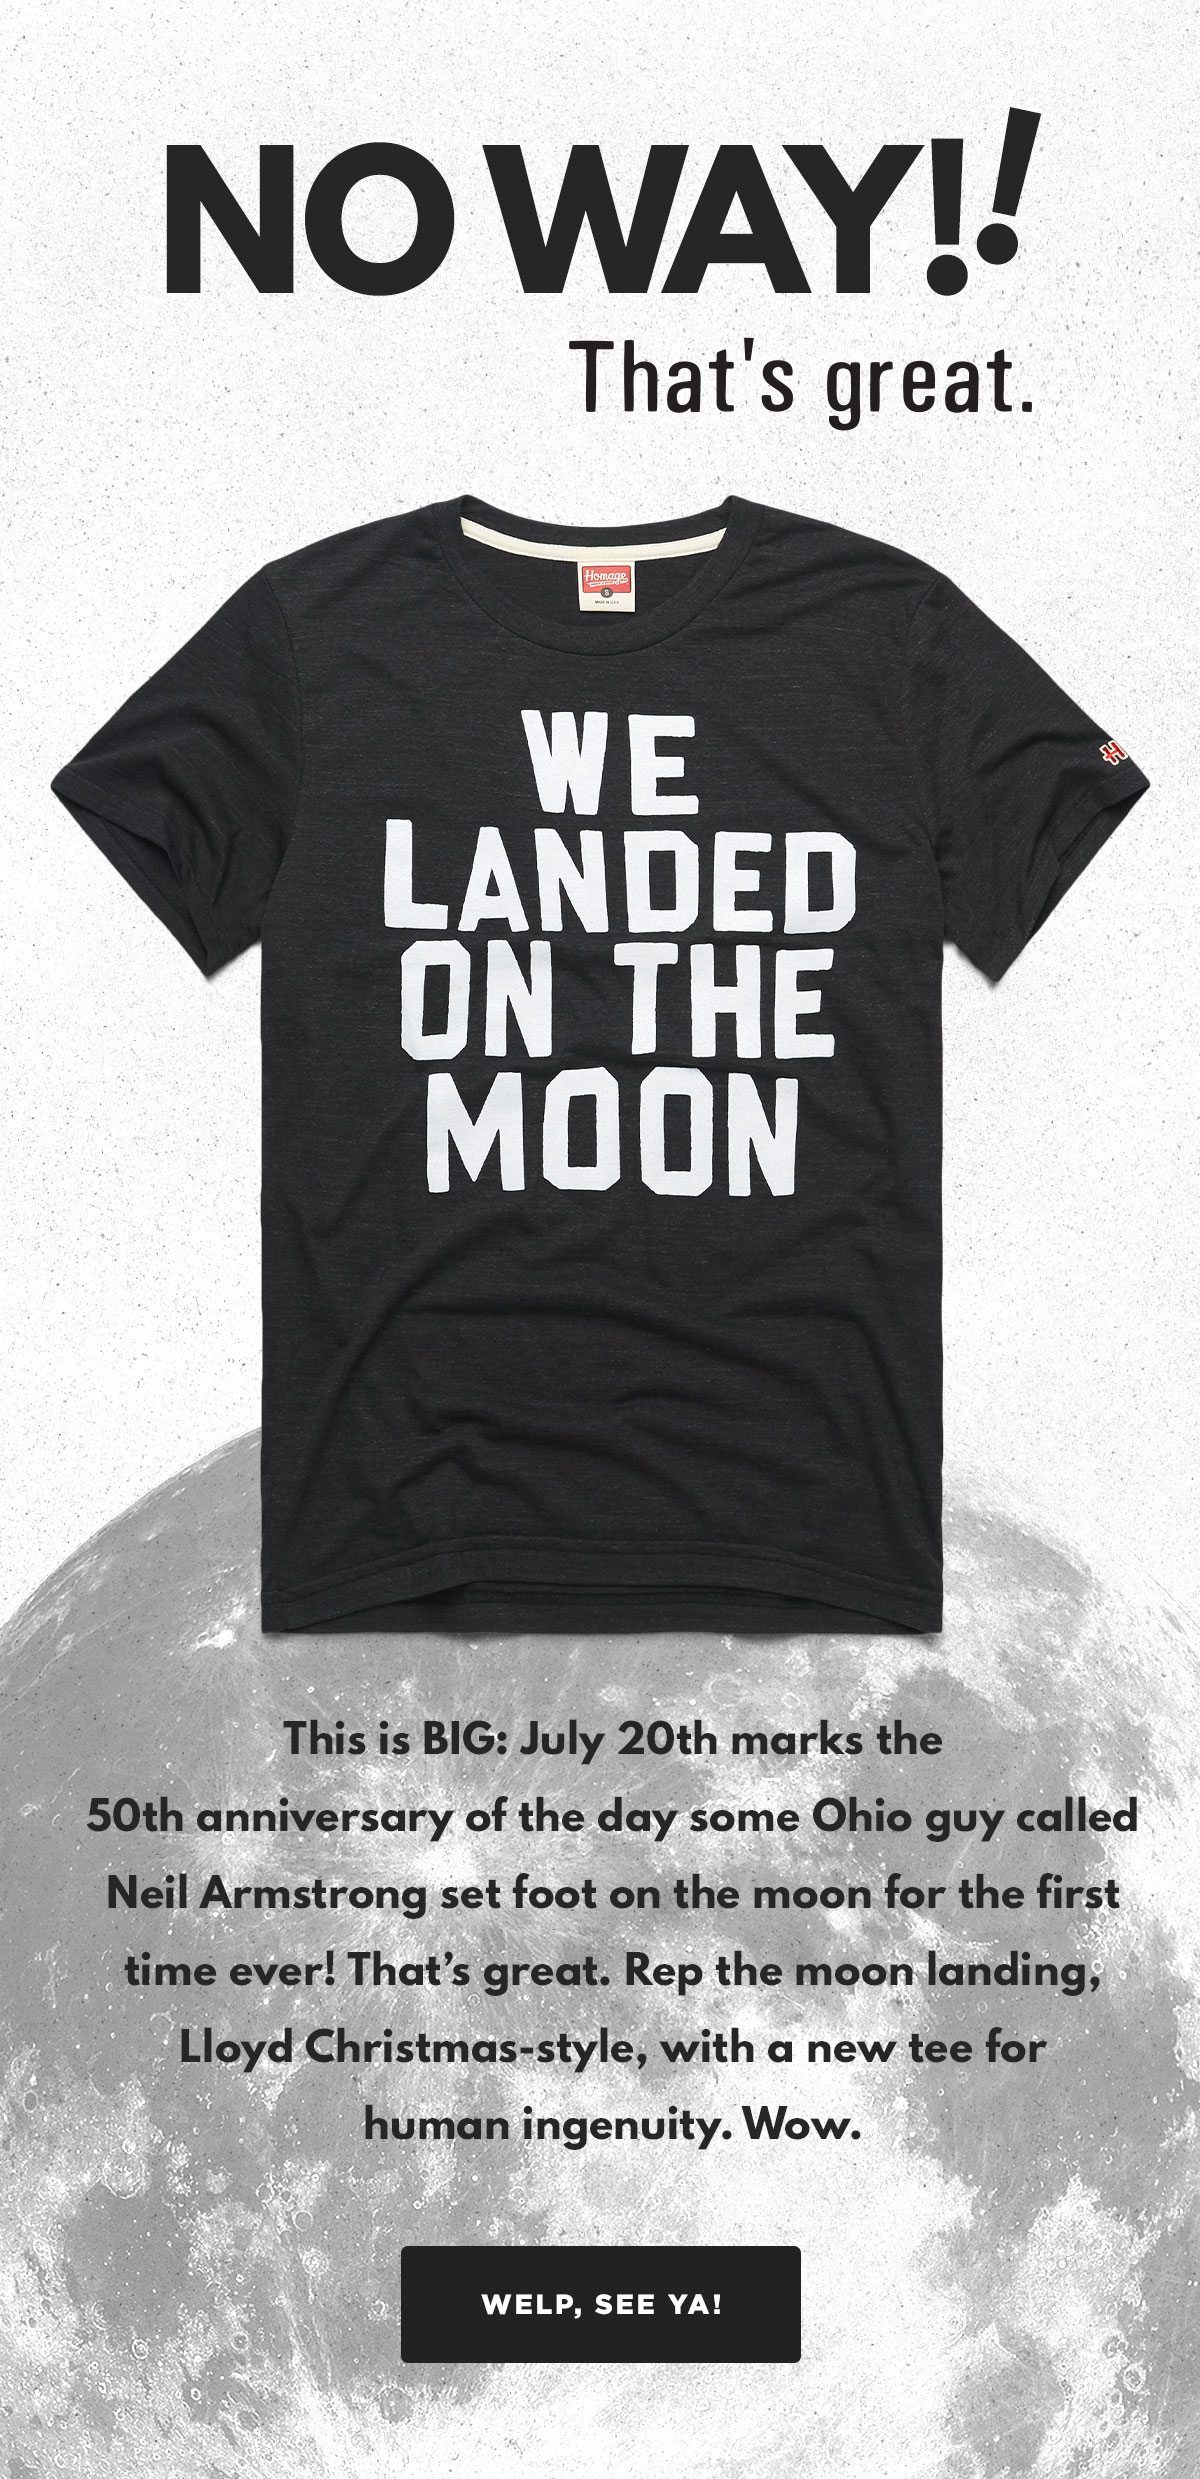 This is BIG: July 20th marks the 50th anniversary of the day some Ohio guy called Neil Armstrong set foot on the moon for the first time ever! That’s great. Rep the moon landing, Lloyd Christmas-style, with a new tee for human ingenuity. Wow.